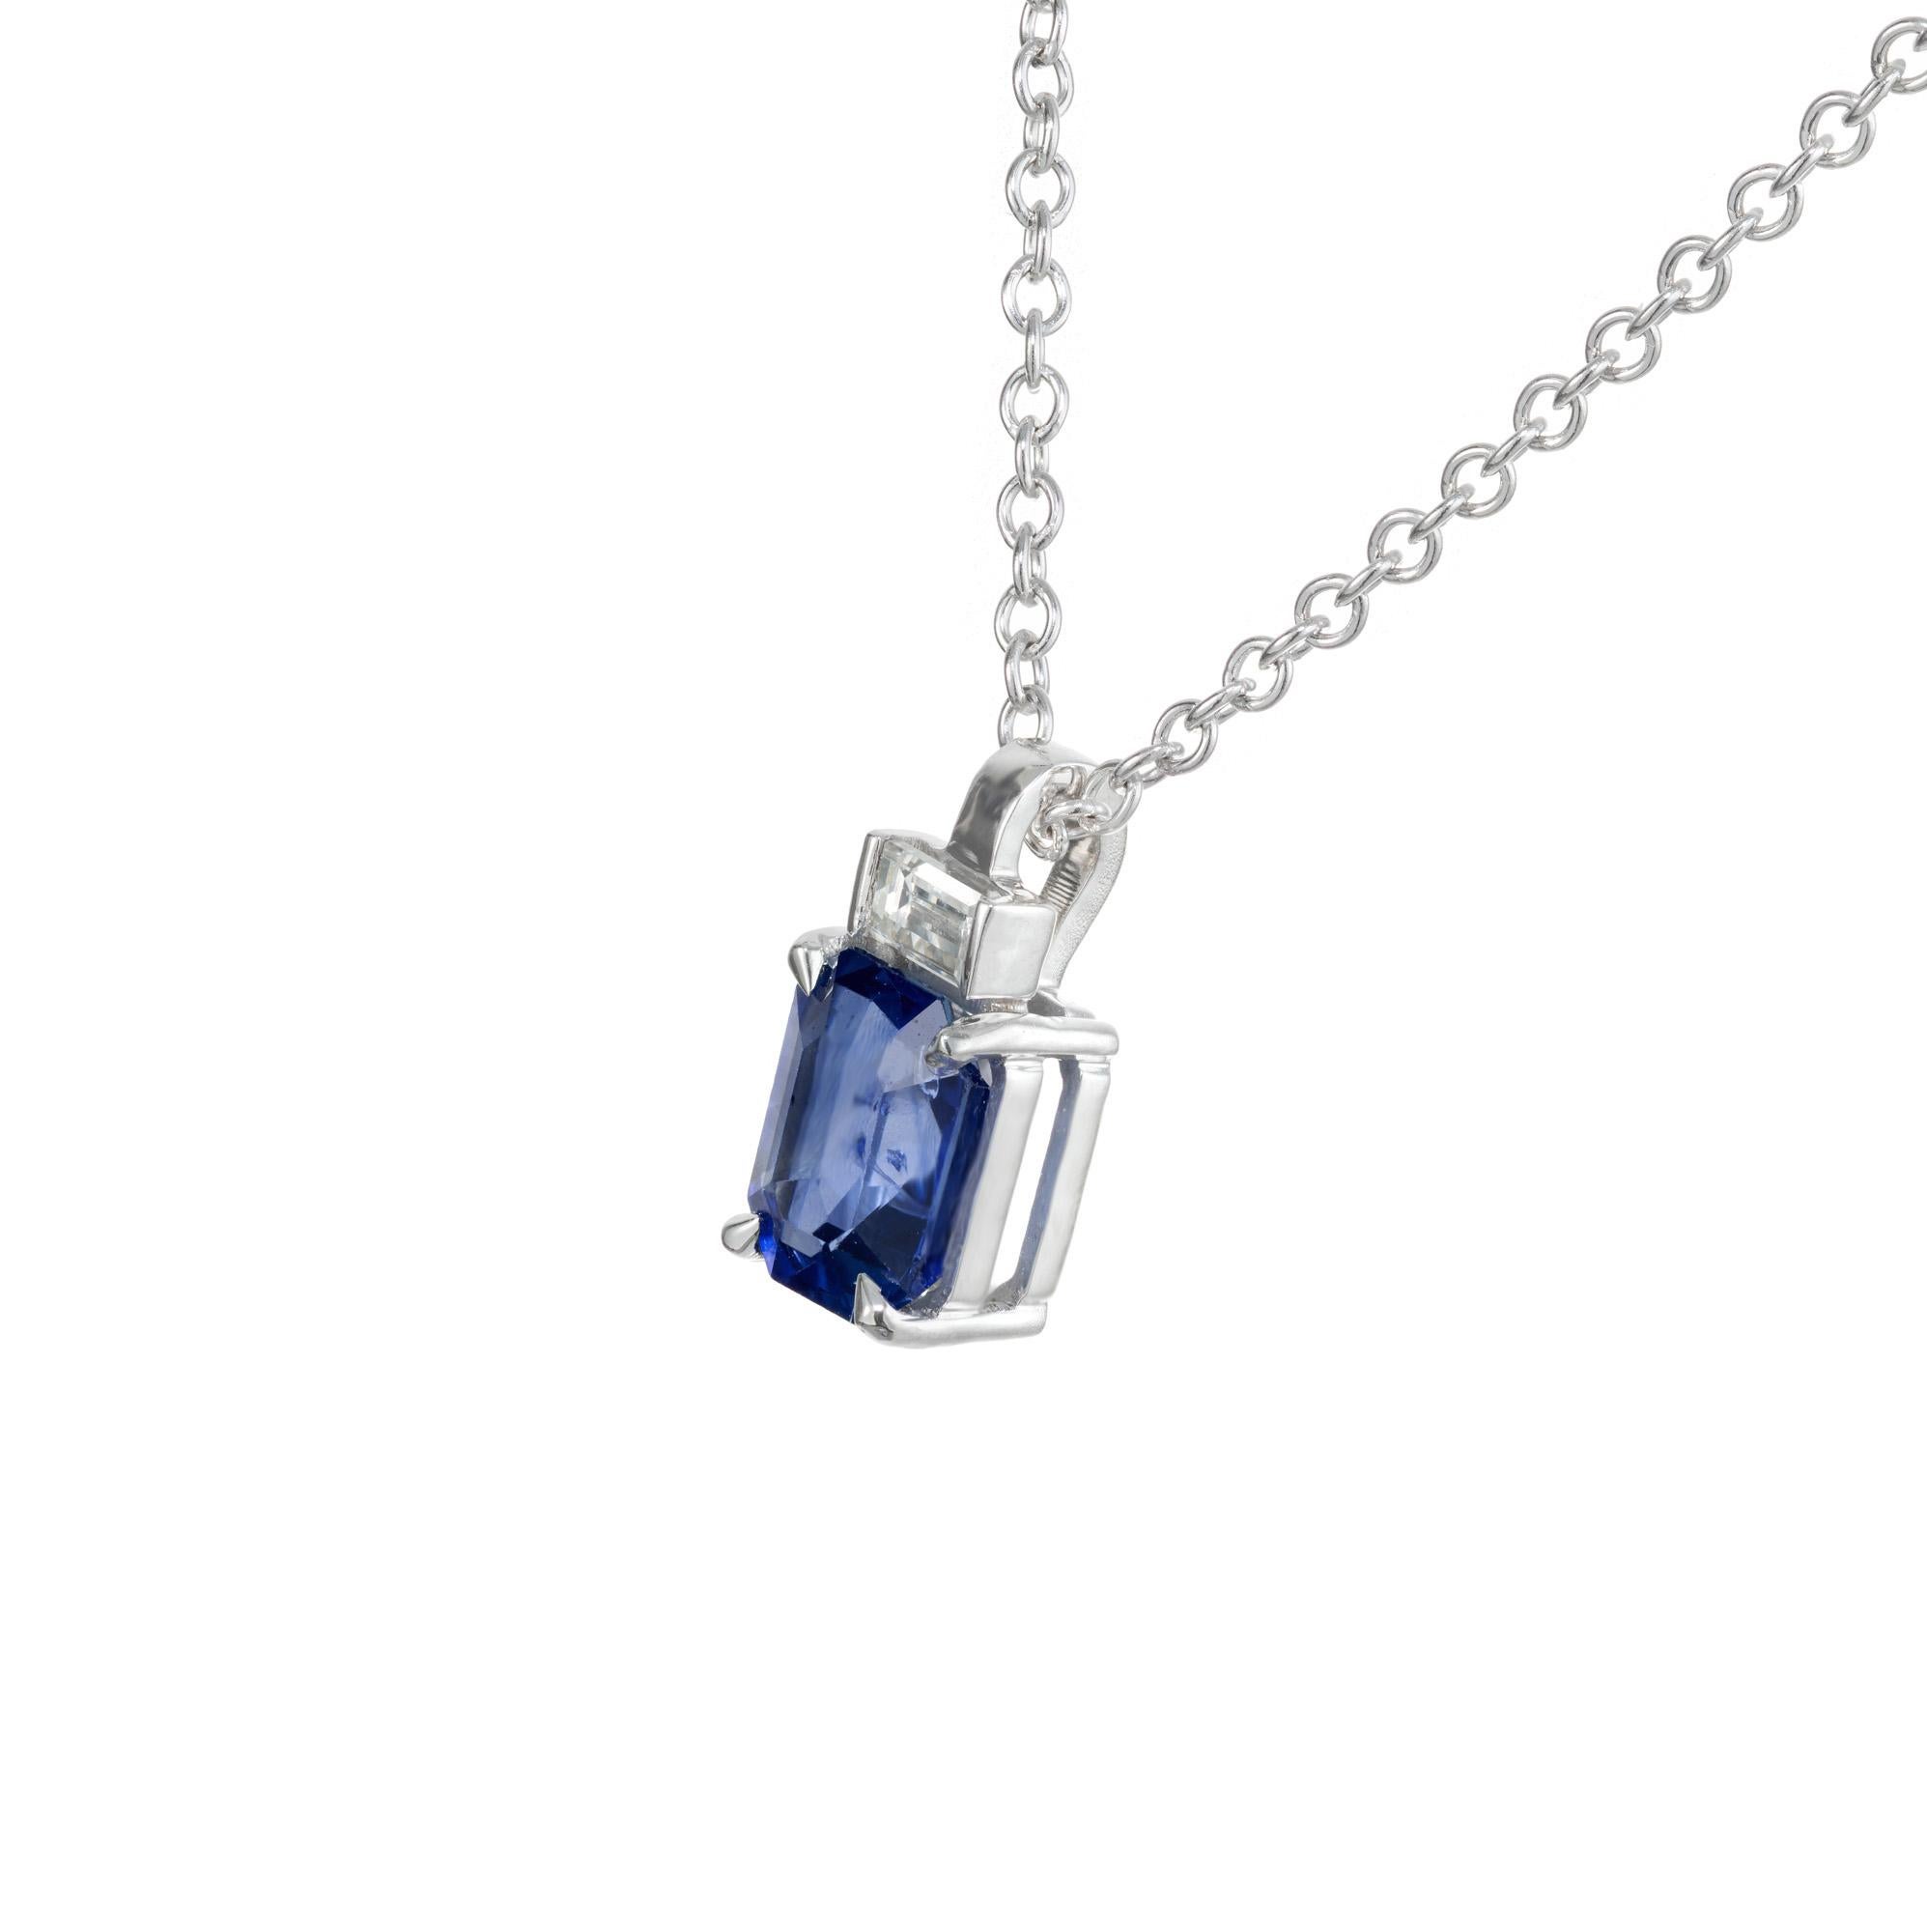 Sapphire and diamond pendant necklace. 1.09 Carat natural sapphire from a 1900's estate, AGL certified simple heat only set in 14k white gold with a baguette accent diamond. 16 inch 14k white gold chain. Designed and crafted in the Peter Suchy